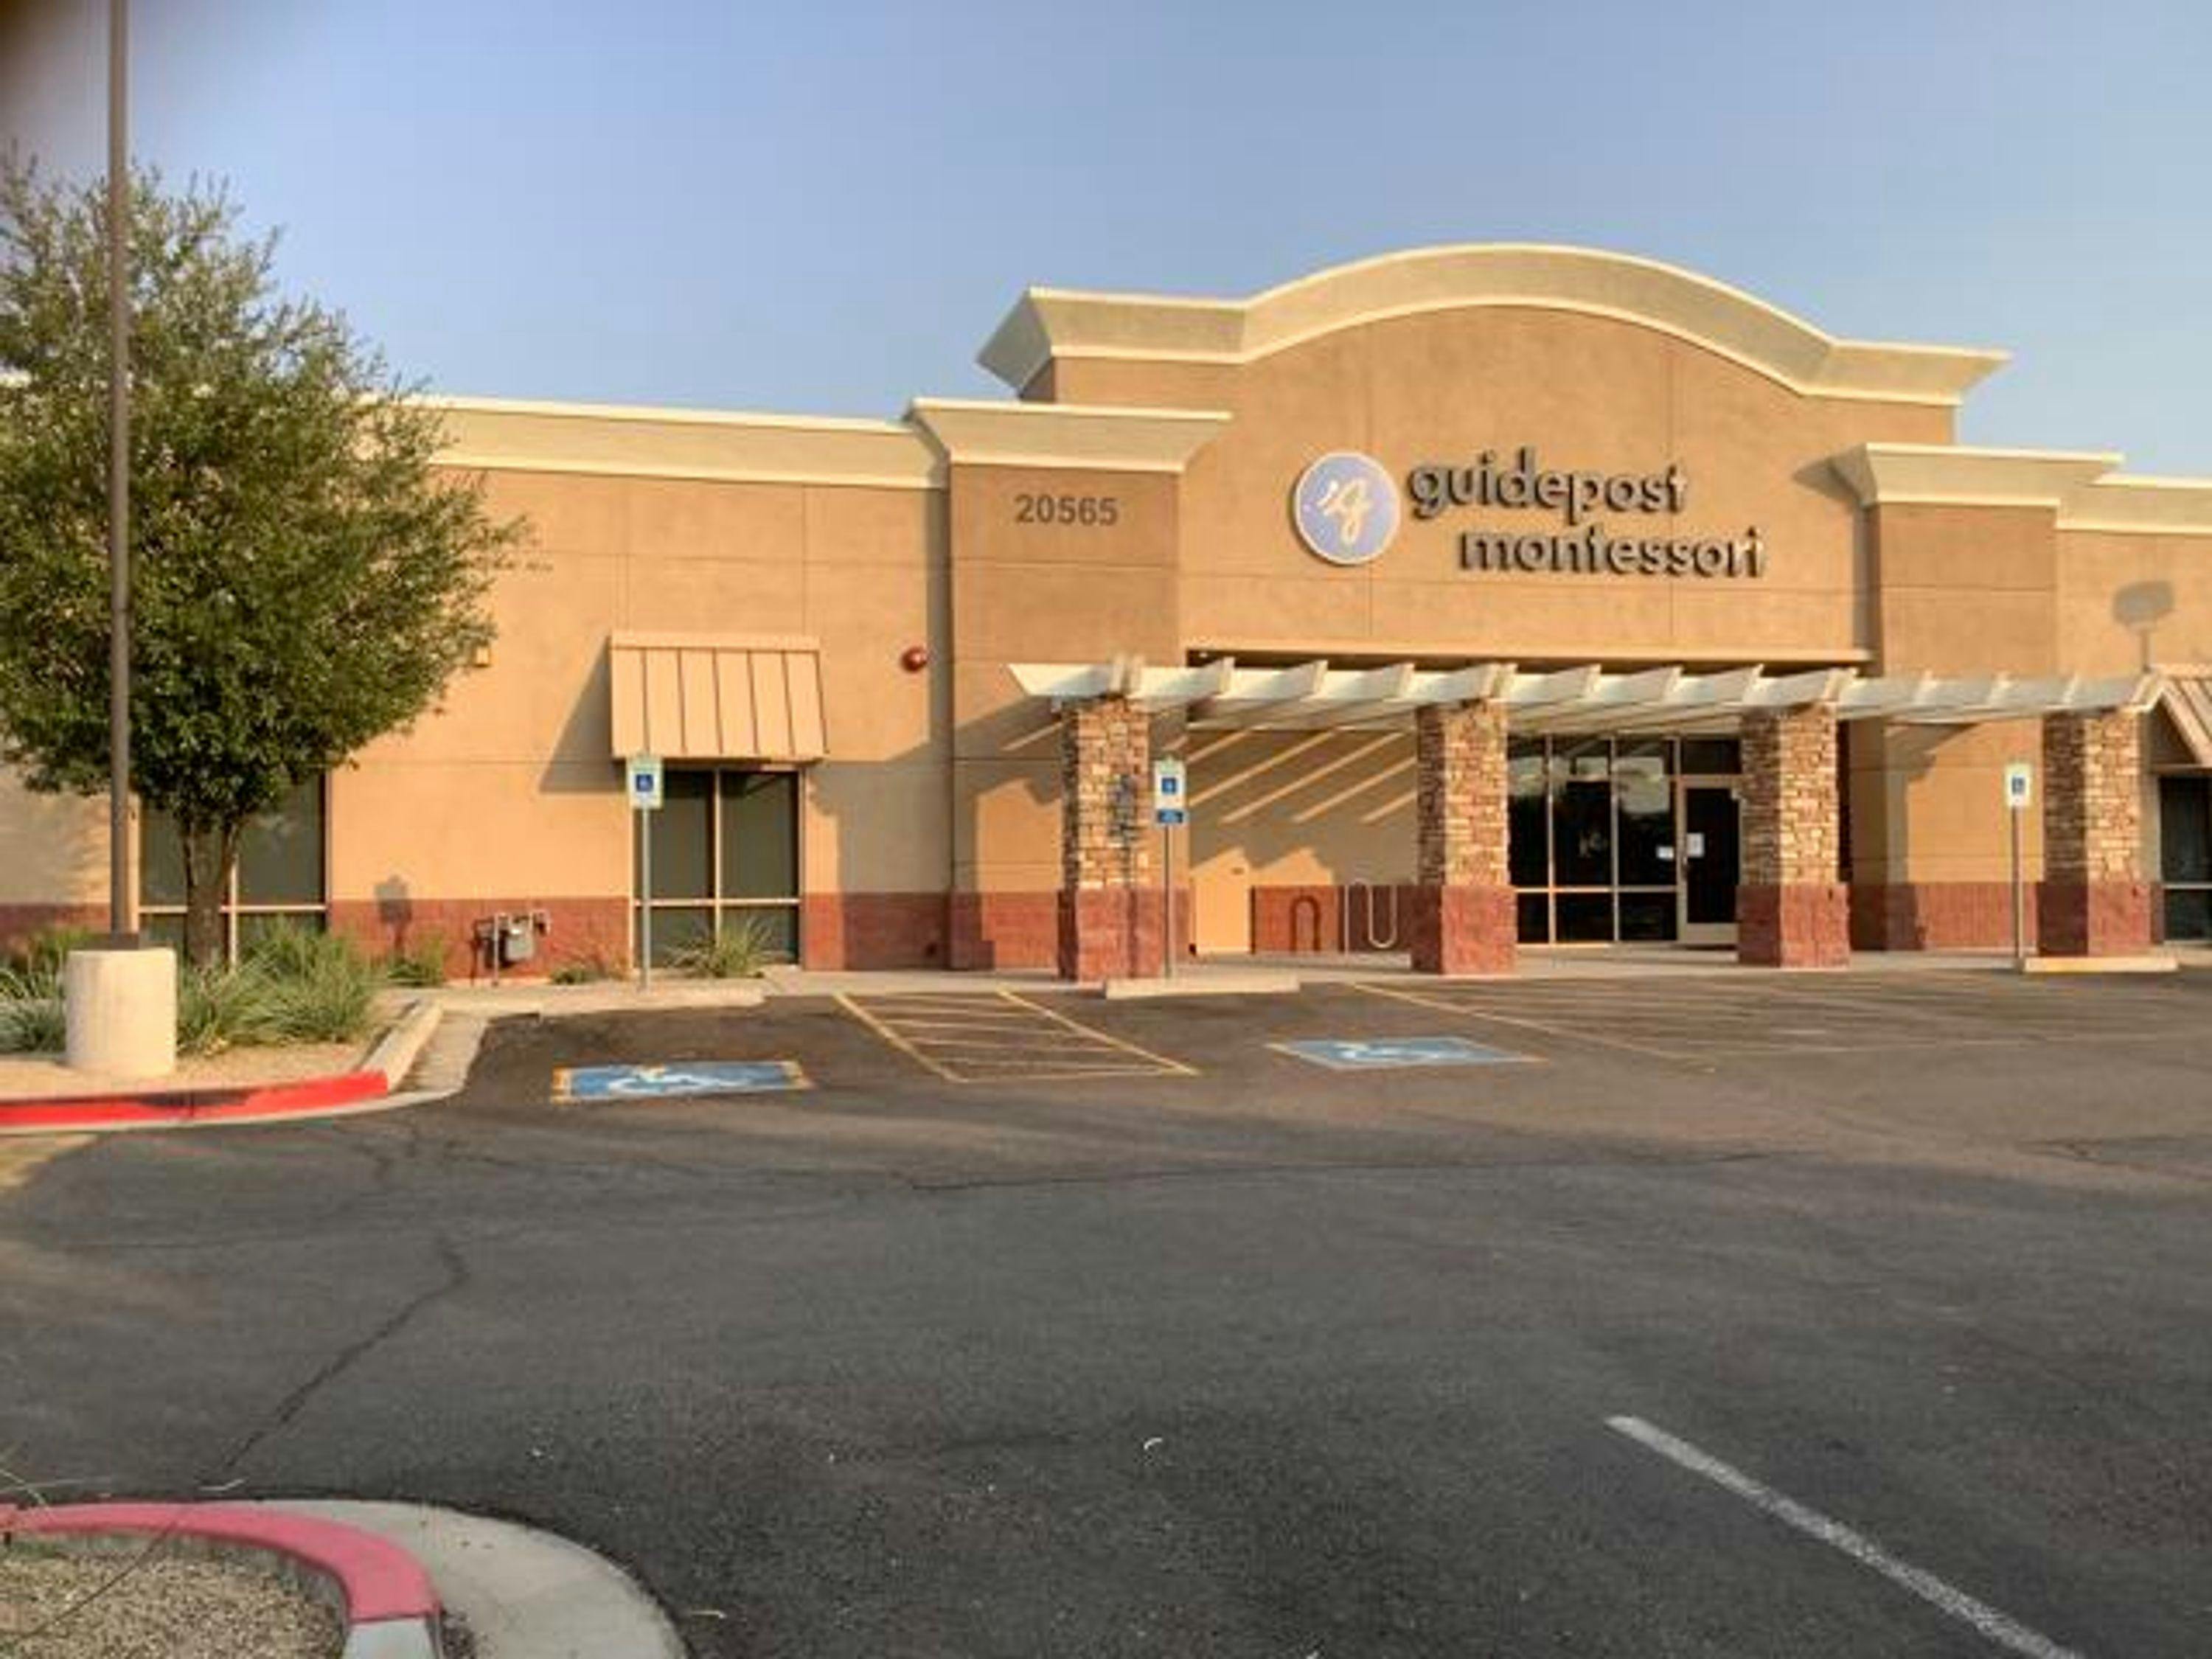 View of Guidepost Montessori at Peoria from the parking lot that shows the handicap parking spots in front of the building as well as the windowed door to the entrance below the branded Guidepost Montessori sign.